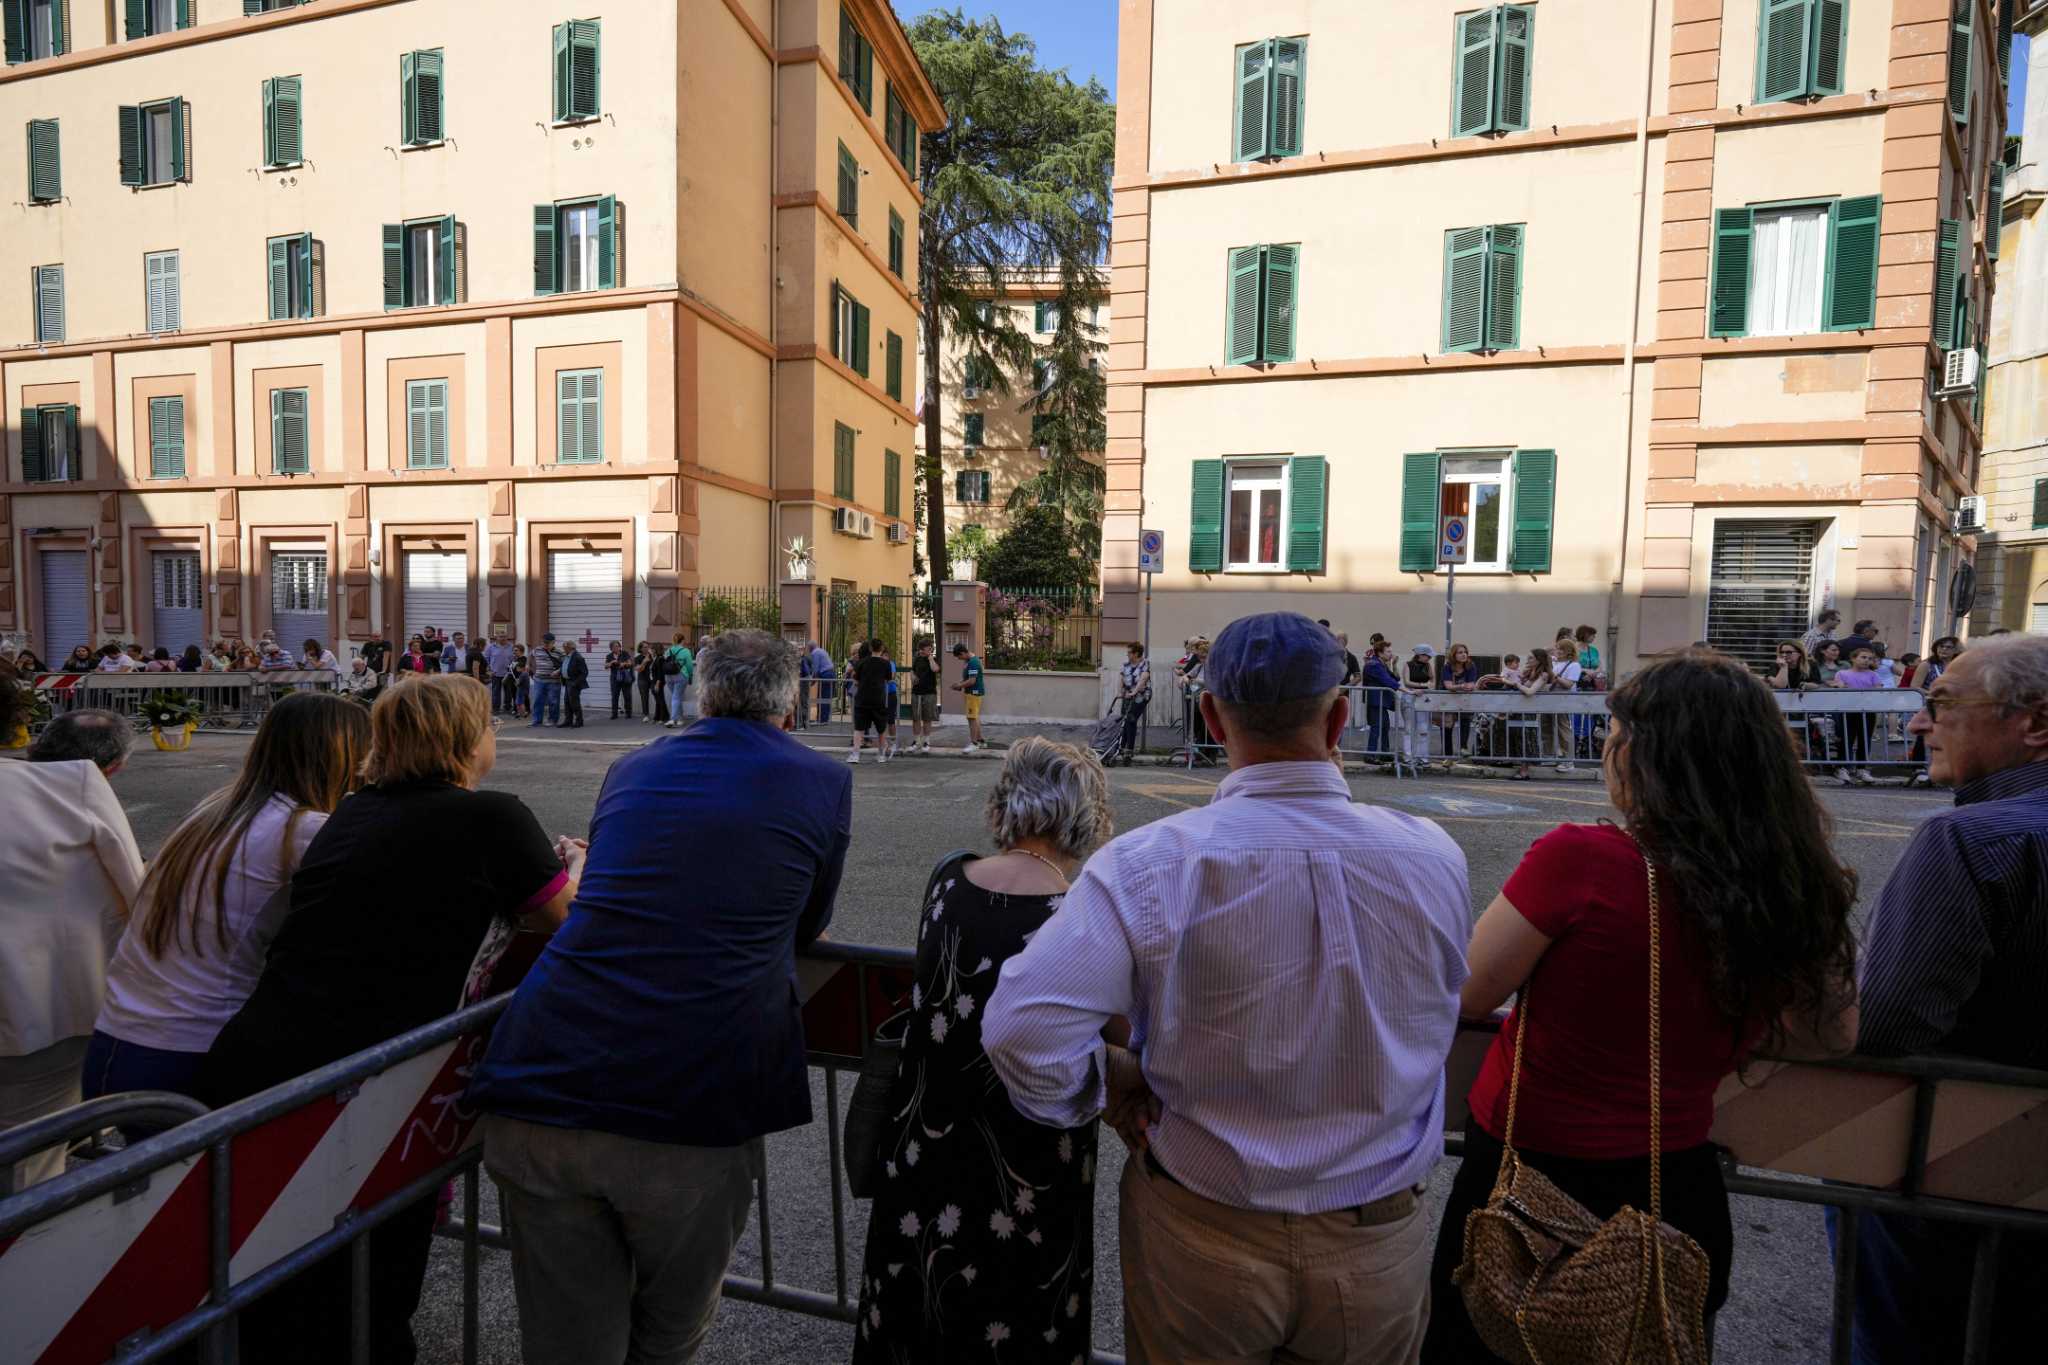 Papal switcheroo as Francis changes plans at last minute to visit different Rome community